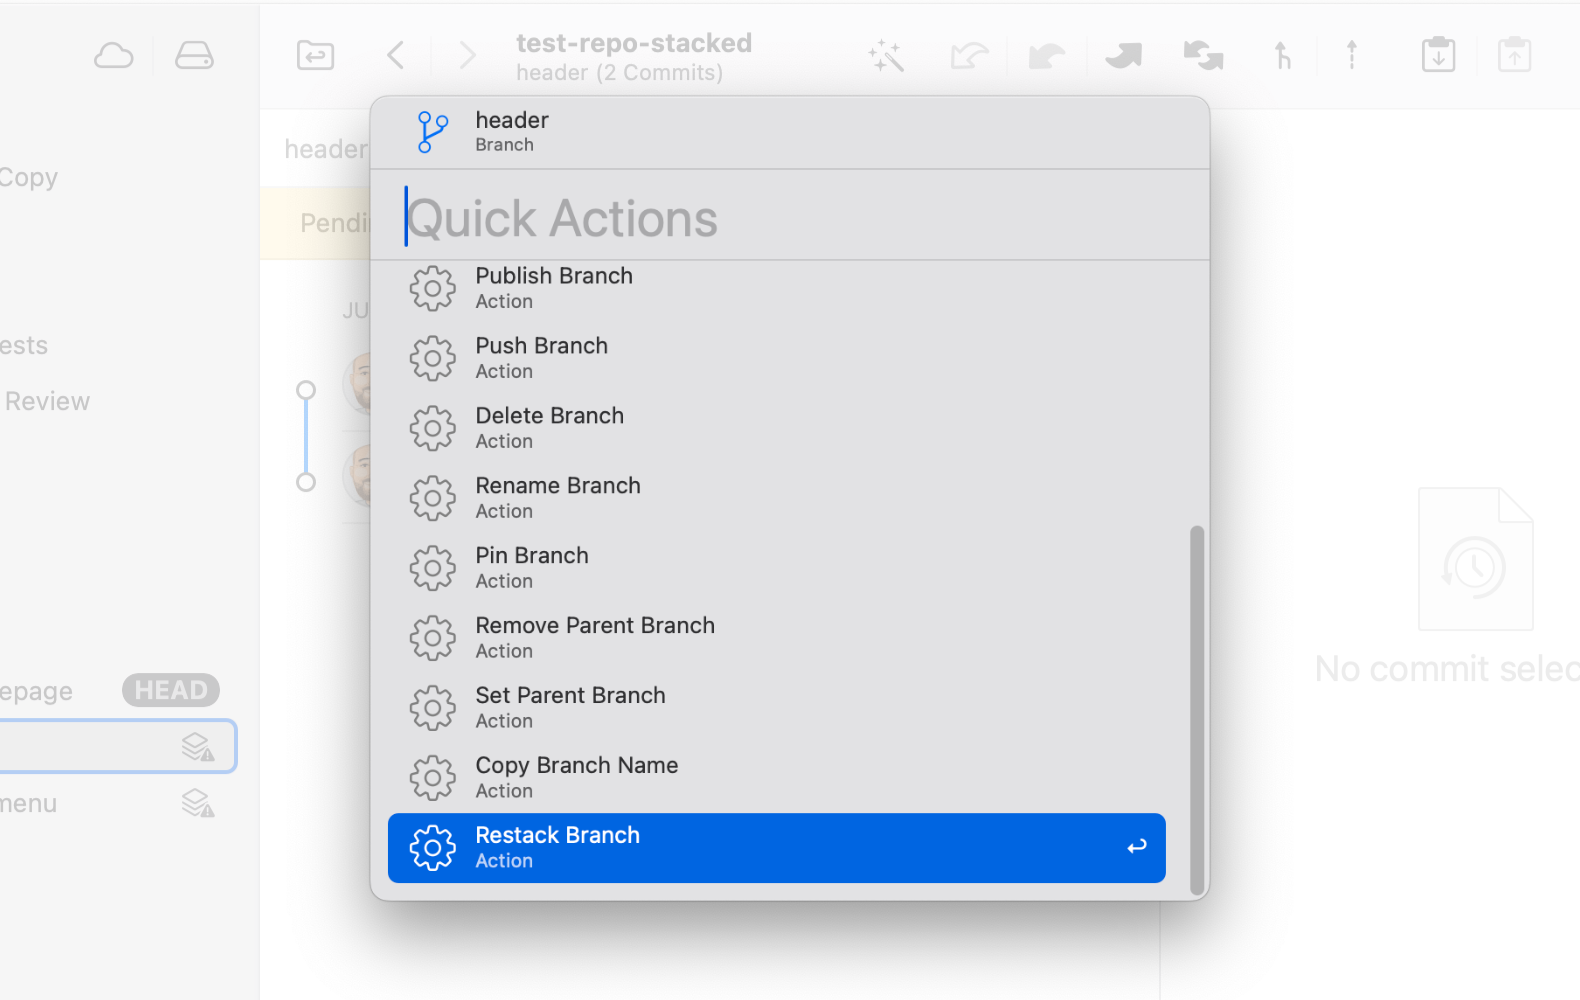 Tower 12 — Restack Branch with Quick Actions